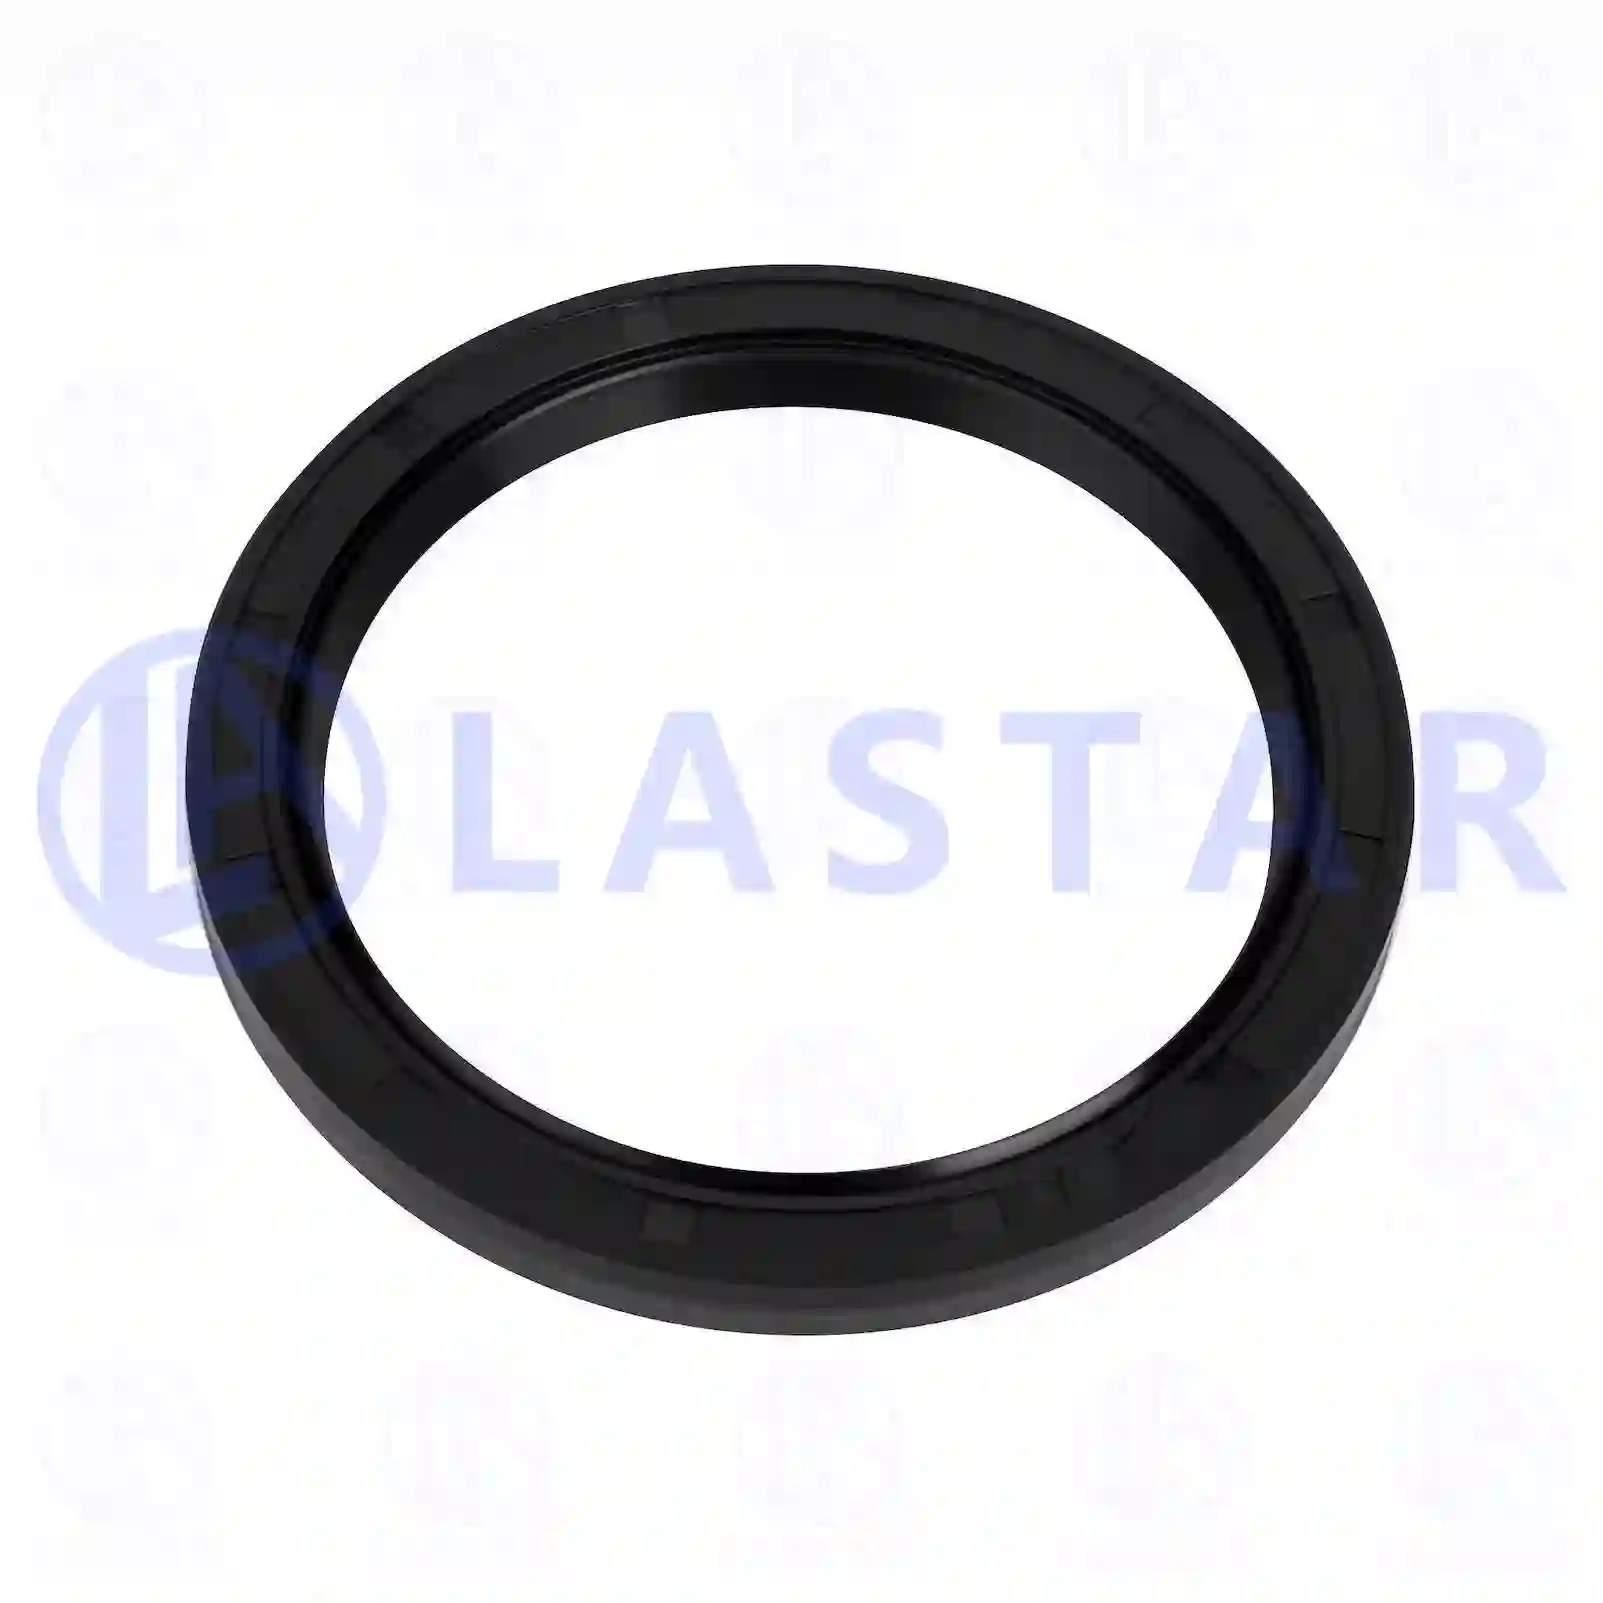 Oil seal, 77730578, 026619, 0002339320, 48M7040, 06562890003, 06562890353, 81552080003, 87661604206, 87661694206, 0089970047, 0129974447, 0179977947, 0209973447, 0239978547, 0239978847, KH1405, ZG02697-0008 ||  77730578 Lastar Spare Part | Truck Spare Parts, Auotomotive Spare Parts Oil seal, 77730578, 026619, 0002339320, 48M7040, 06562890003, 06562890353, 81552080003, 87661604206, 87661694206, 0089970047, 0129974447, 0179977947, 0209973447, 0239978547, 0239978847, KH1405, ZG02697-0008 ||  77730578 Lastar Spare Part | Truck Spare Parts, Auotomotive Spare Parts